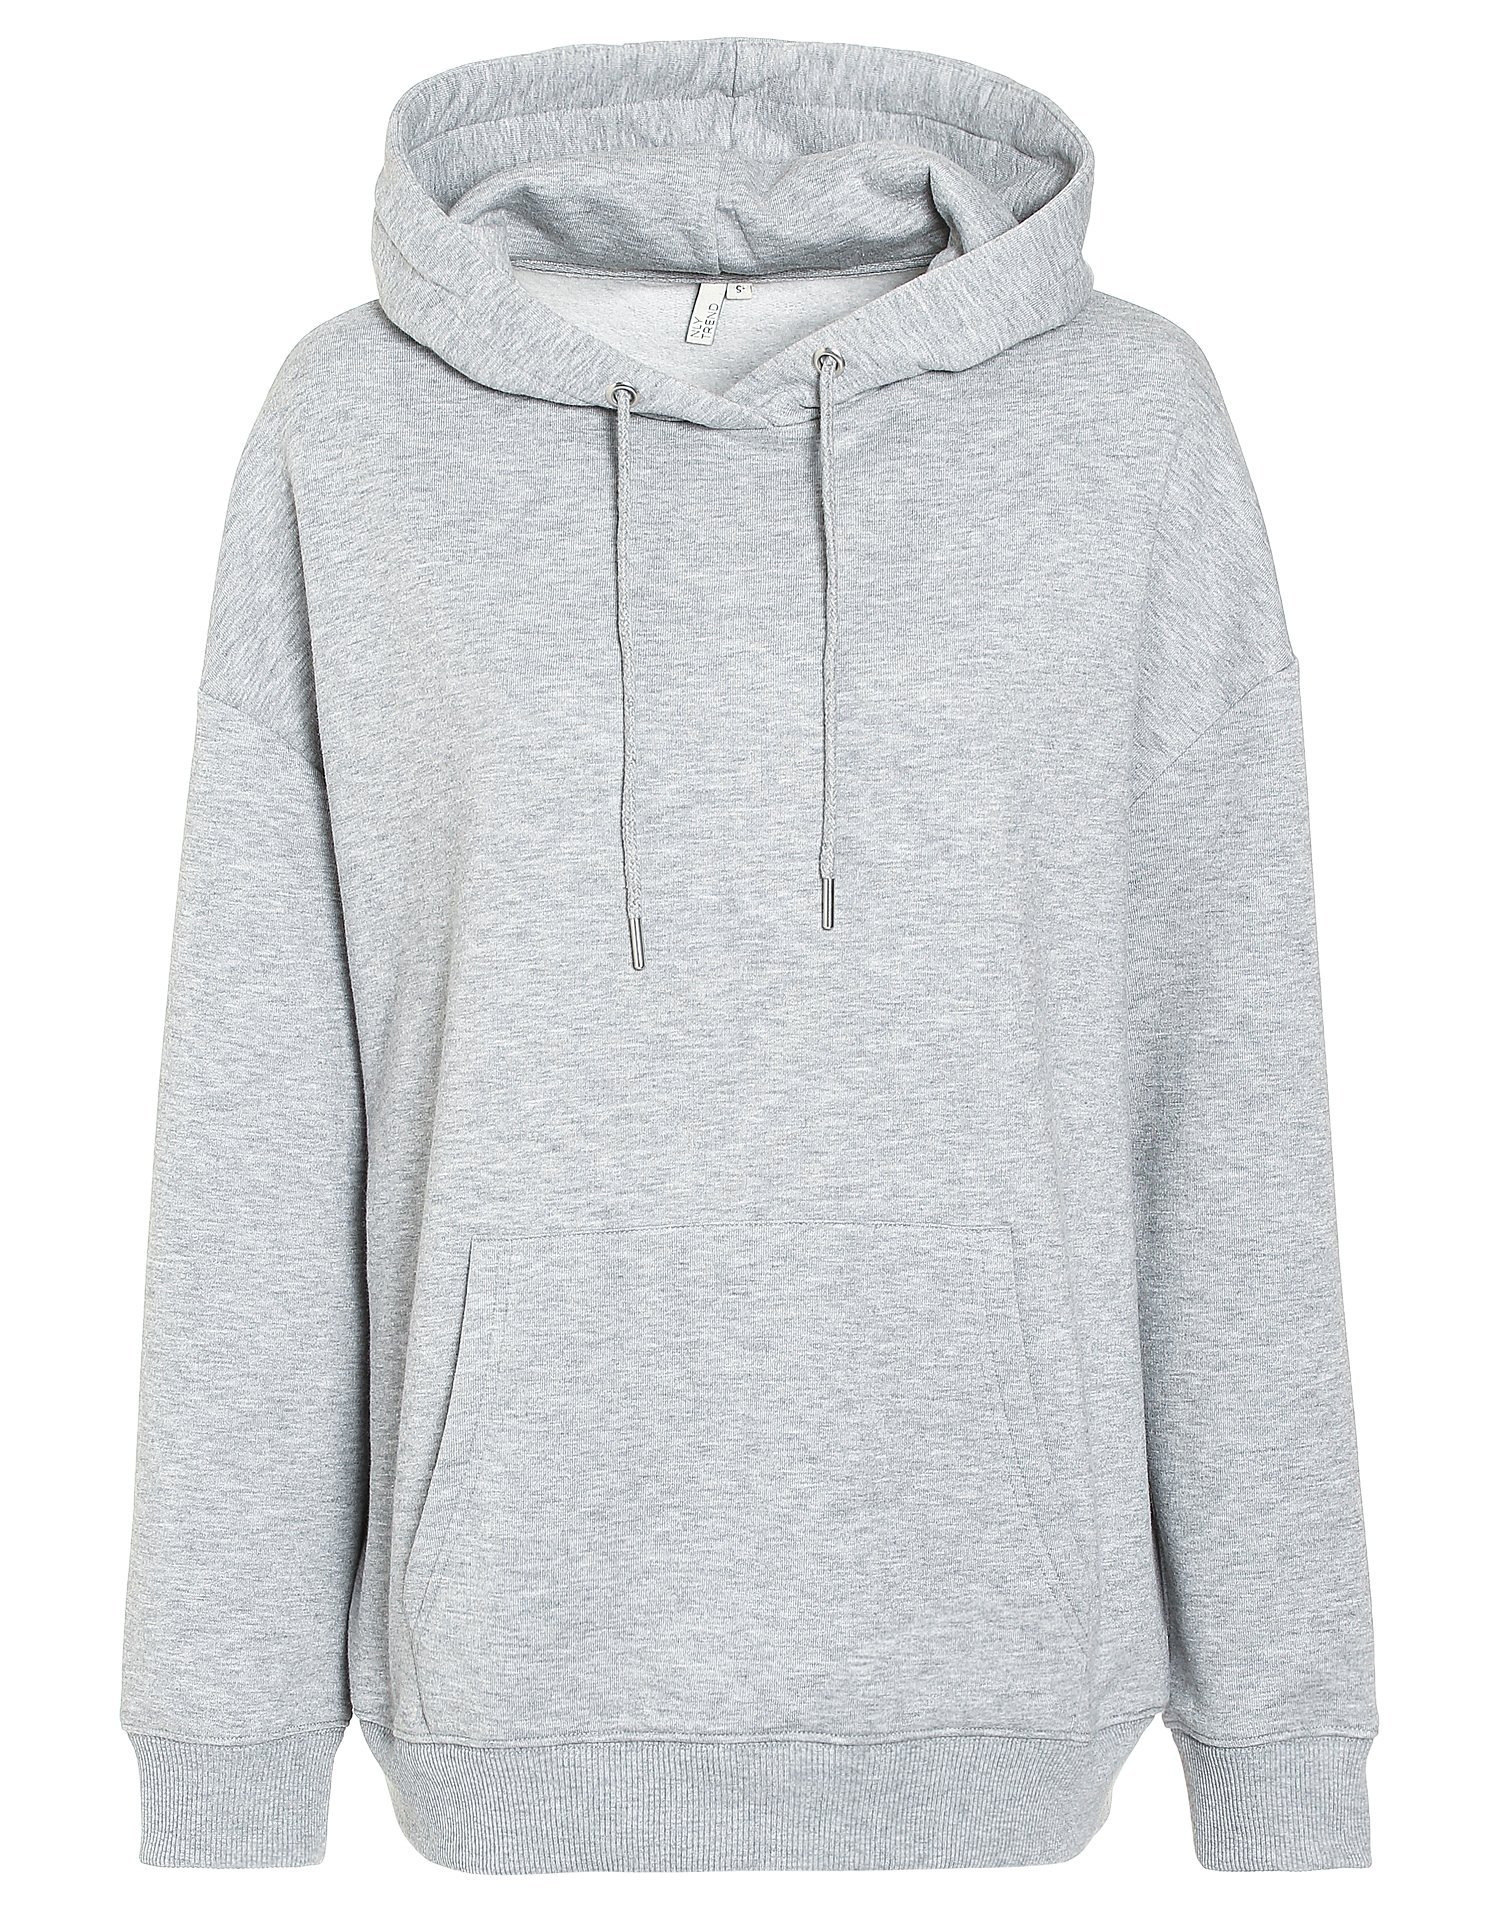 nelly oversized hoodie